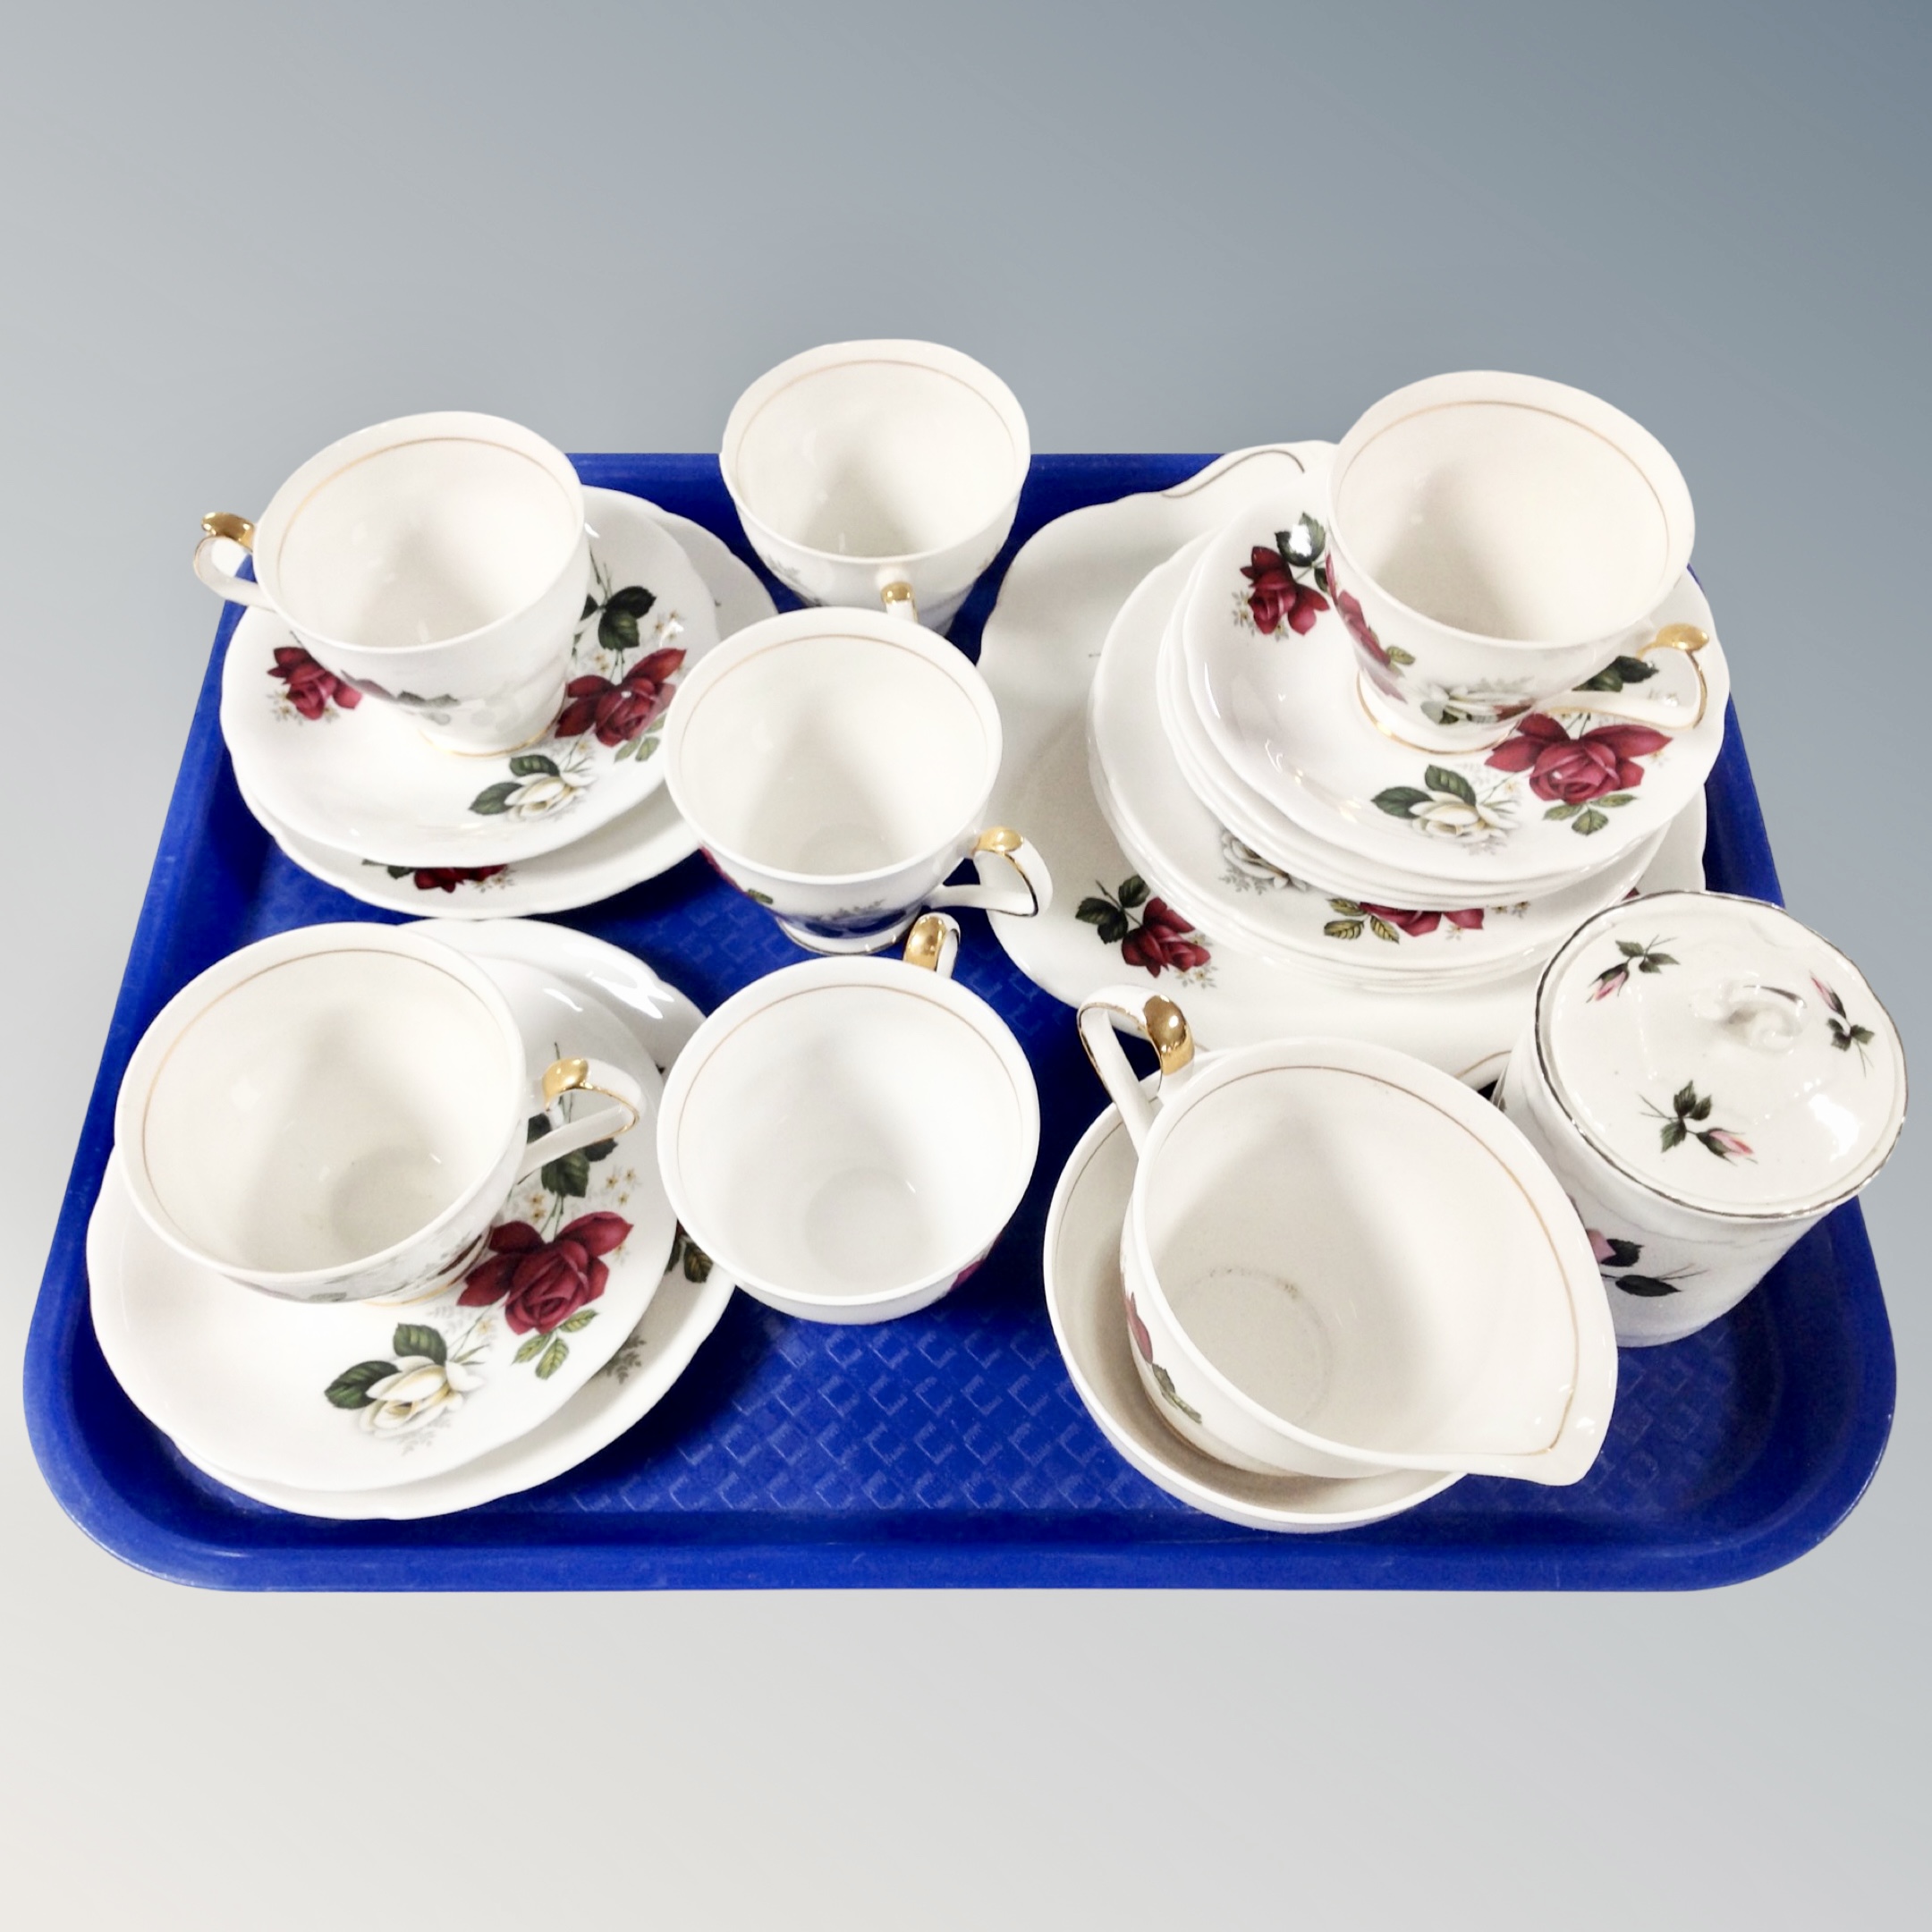 Twenty two pieces of Royal Windsor bone china decorated with roses